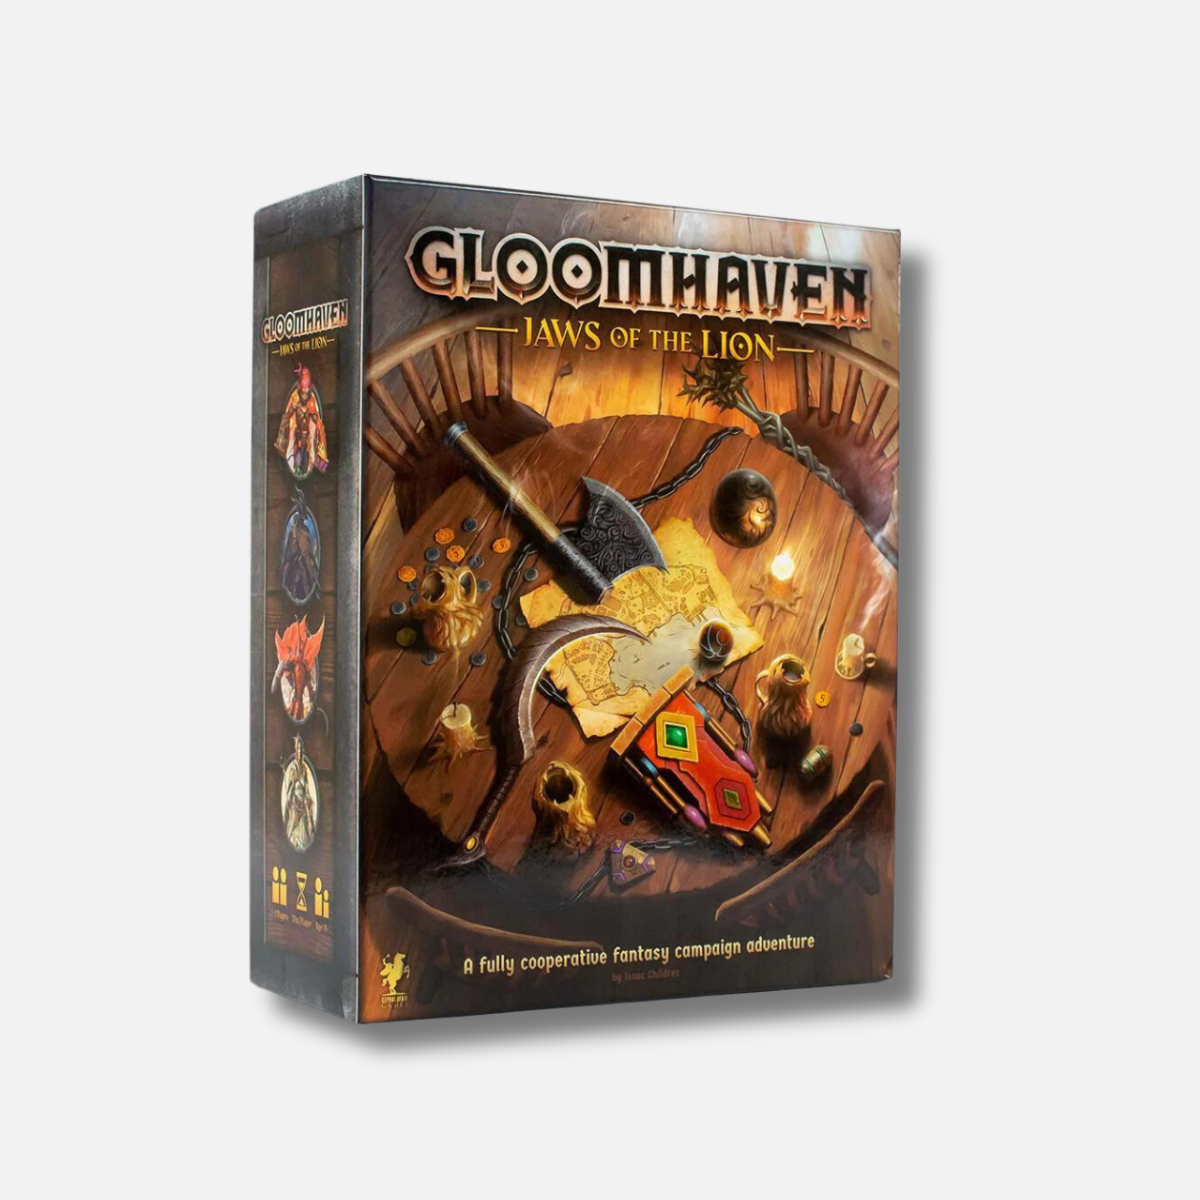 Gloomhaven: Jaws of the lion